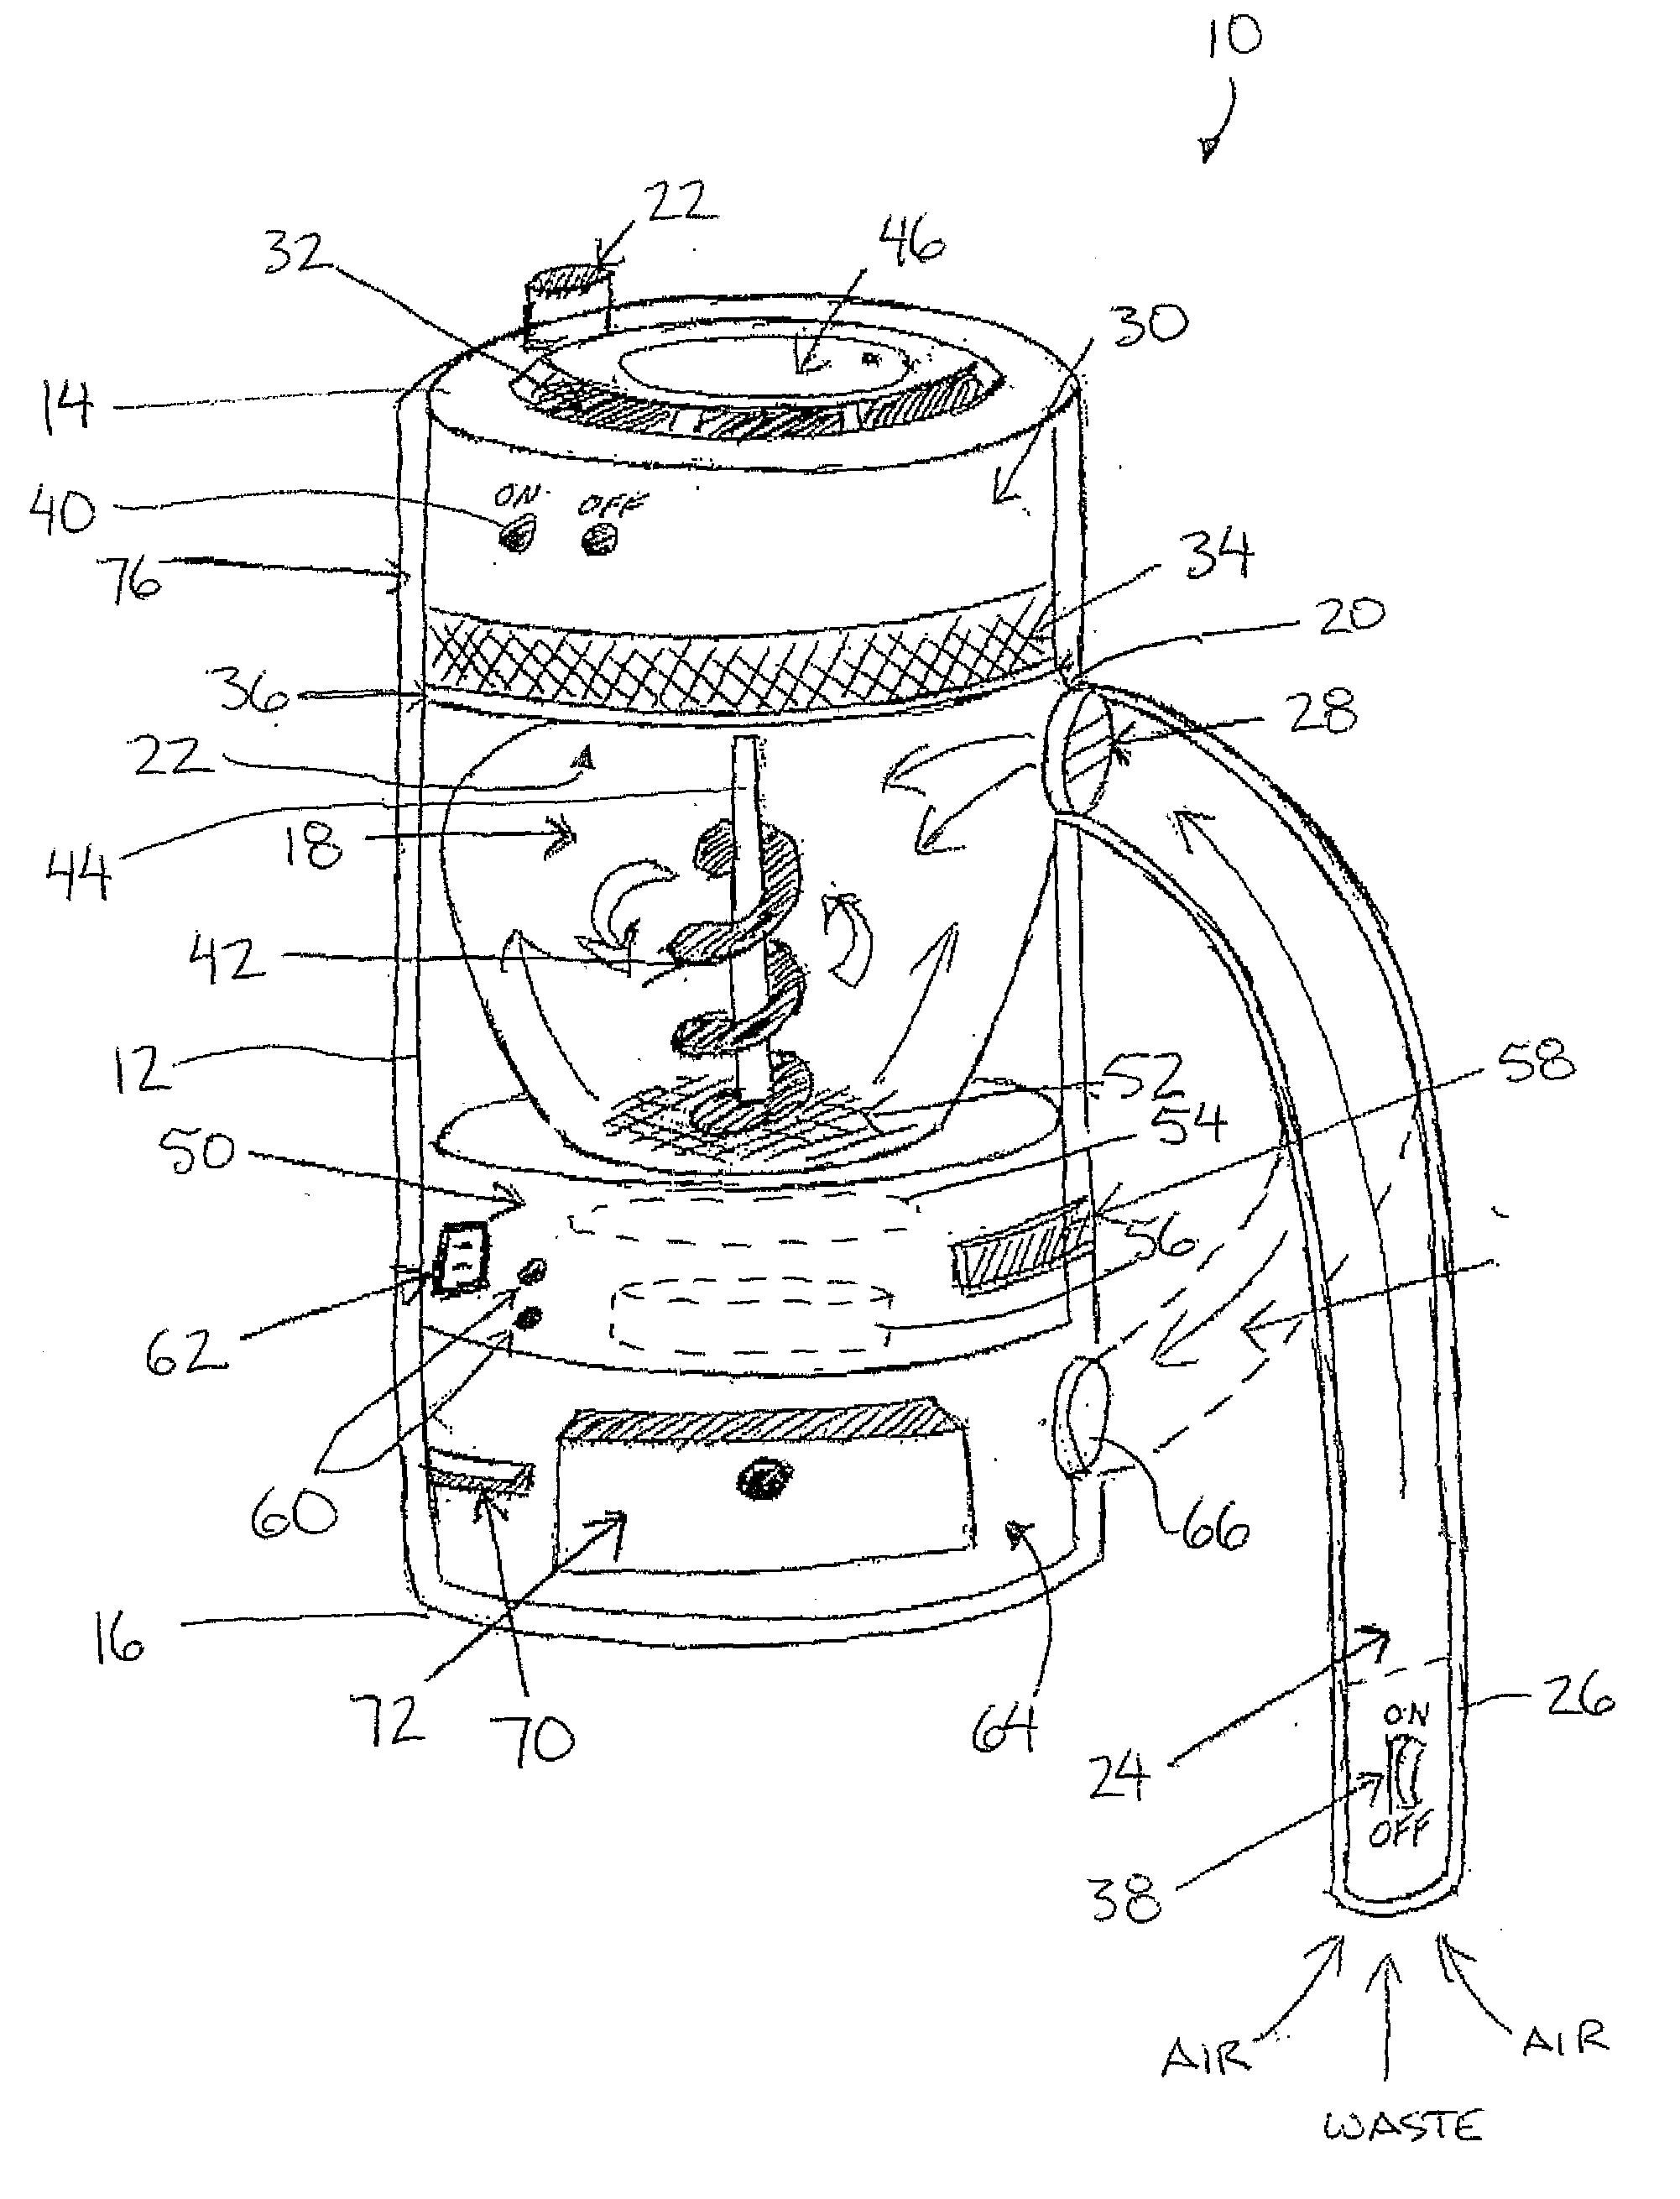 Waste Collecting Device